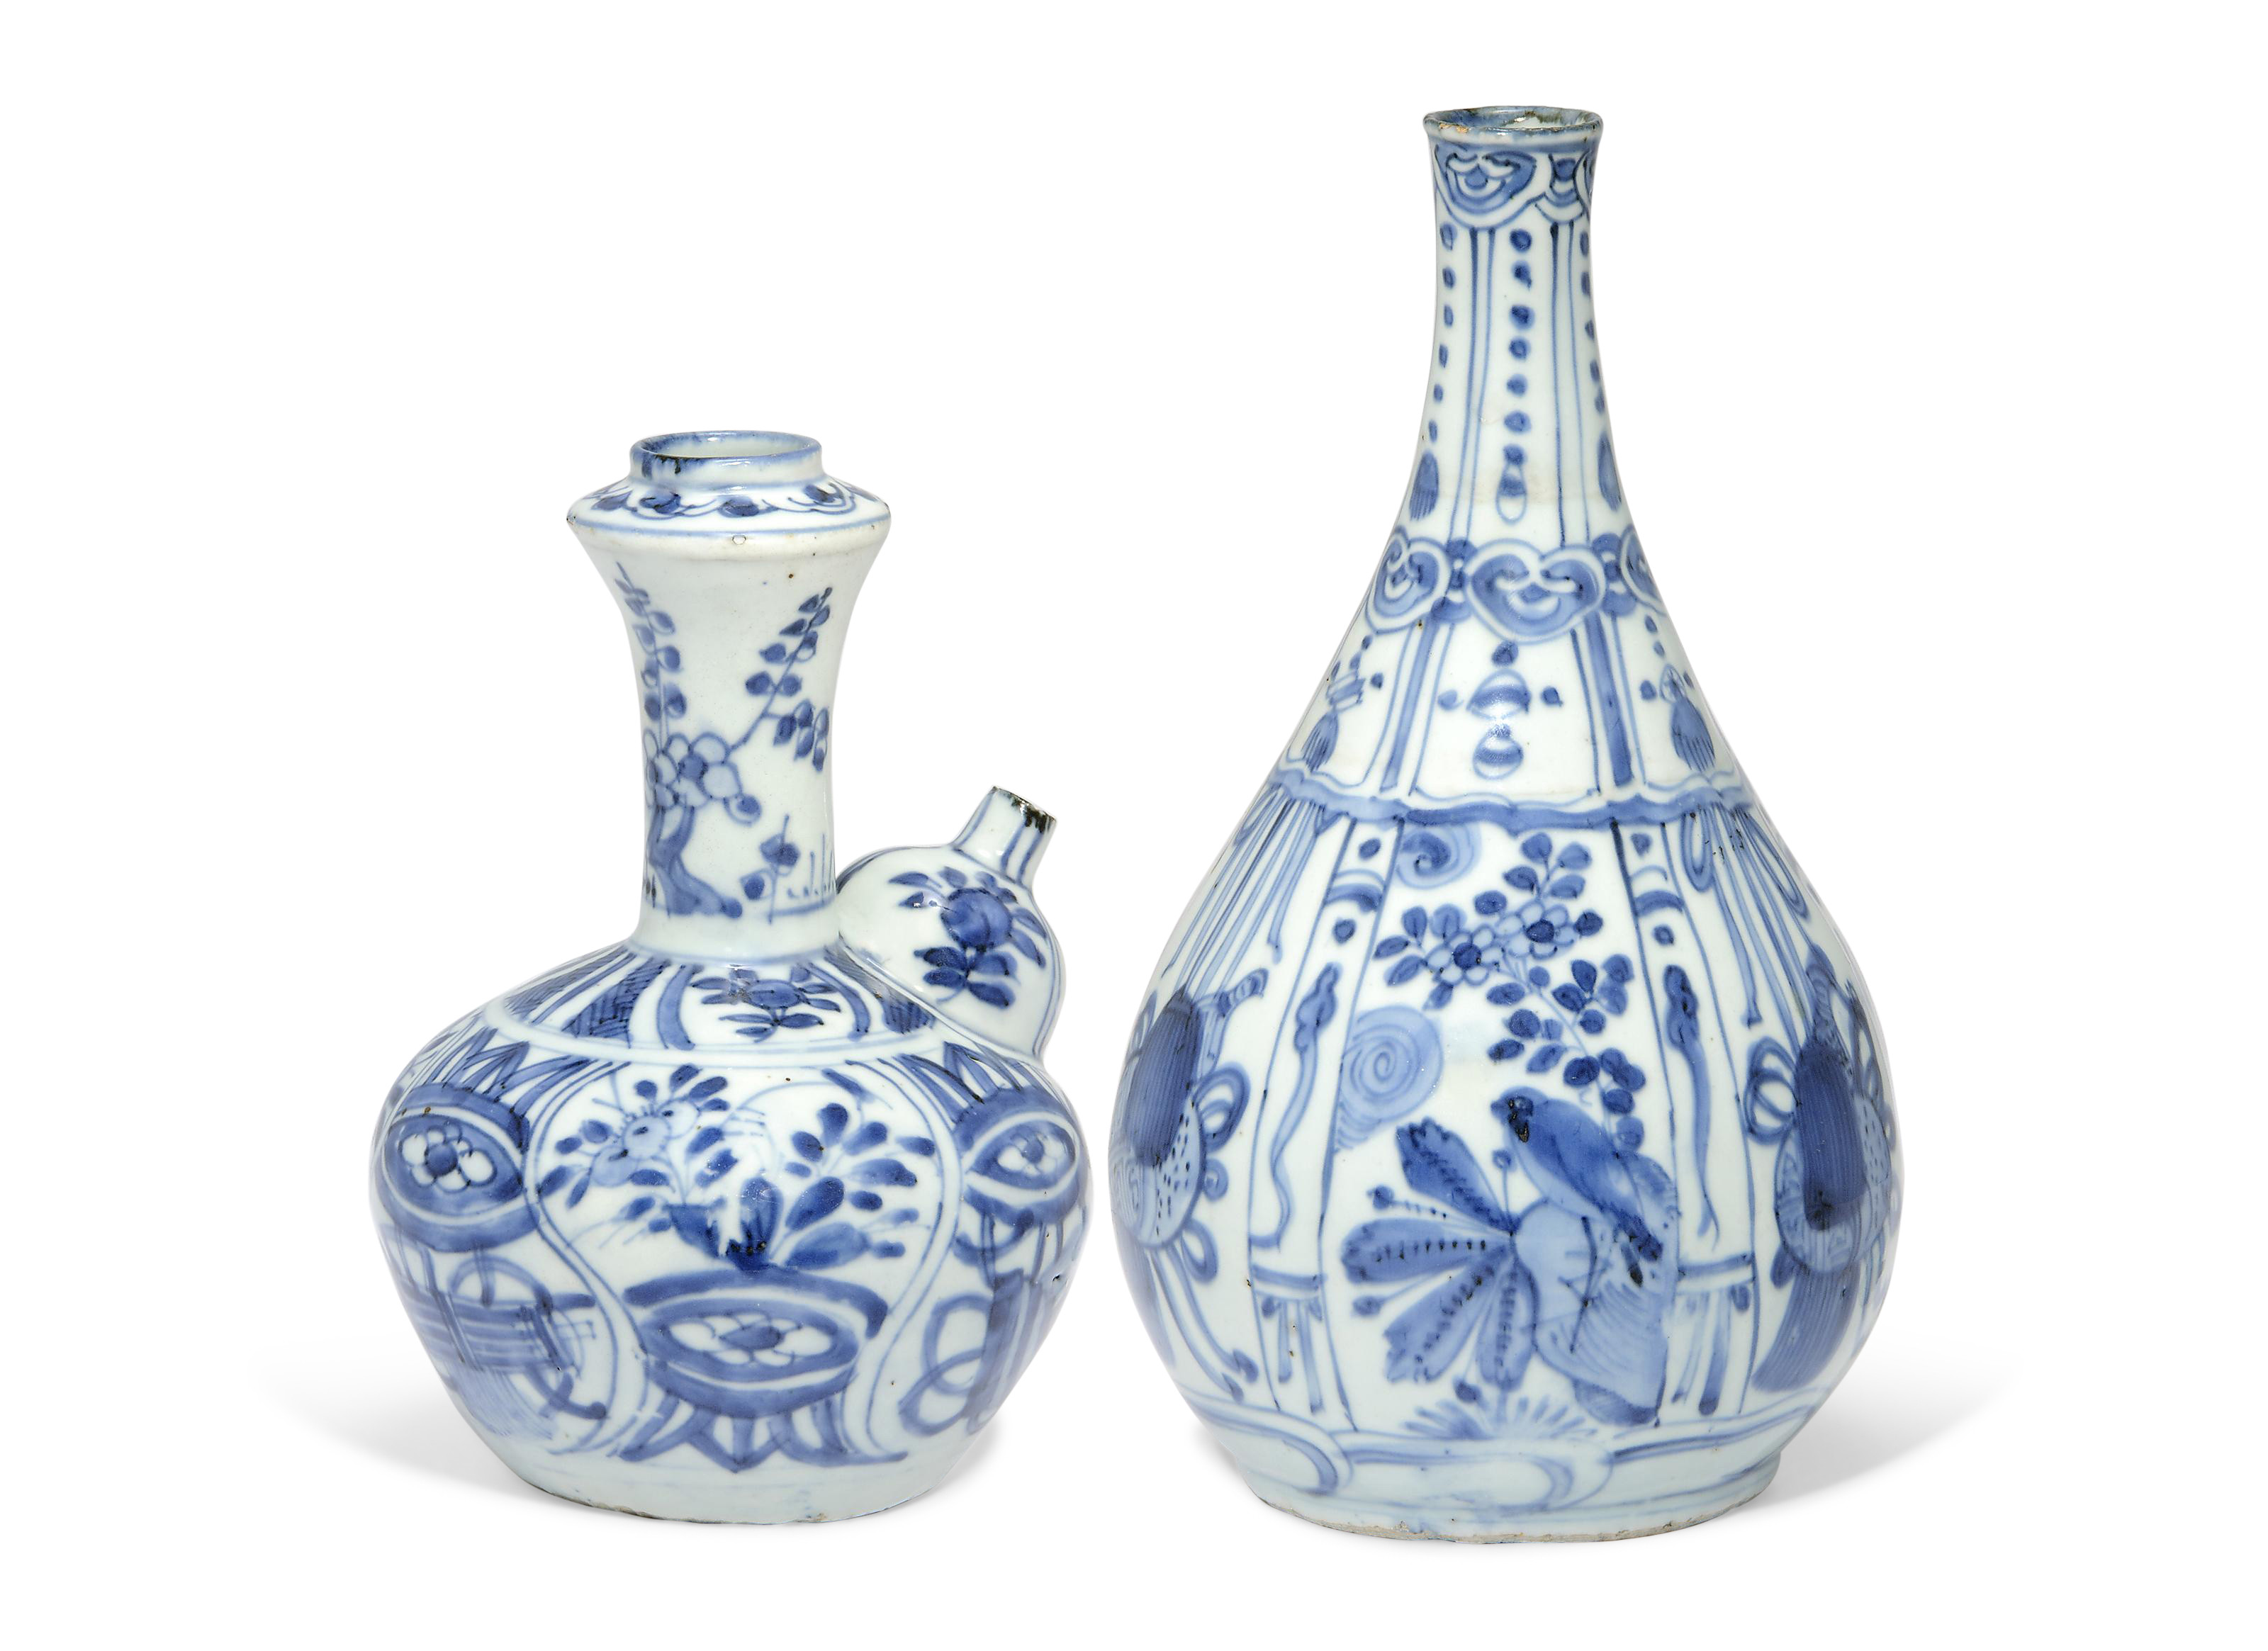 20 attractive Light Blue Glass Vase 2024 free download light blue glass vase of a blue and white kendi and a bottle vase wanli period 1573 1619 pertaining to a blue and white kendi and a bottle vase wanli period 1573 1619 christies